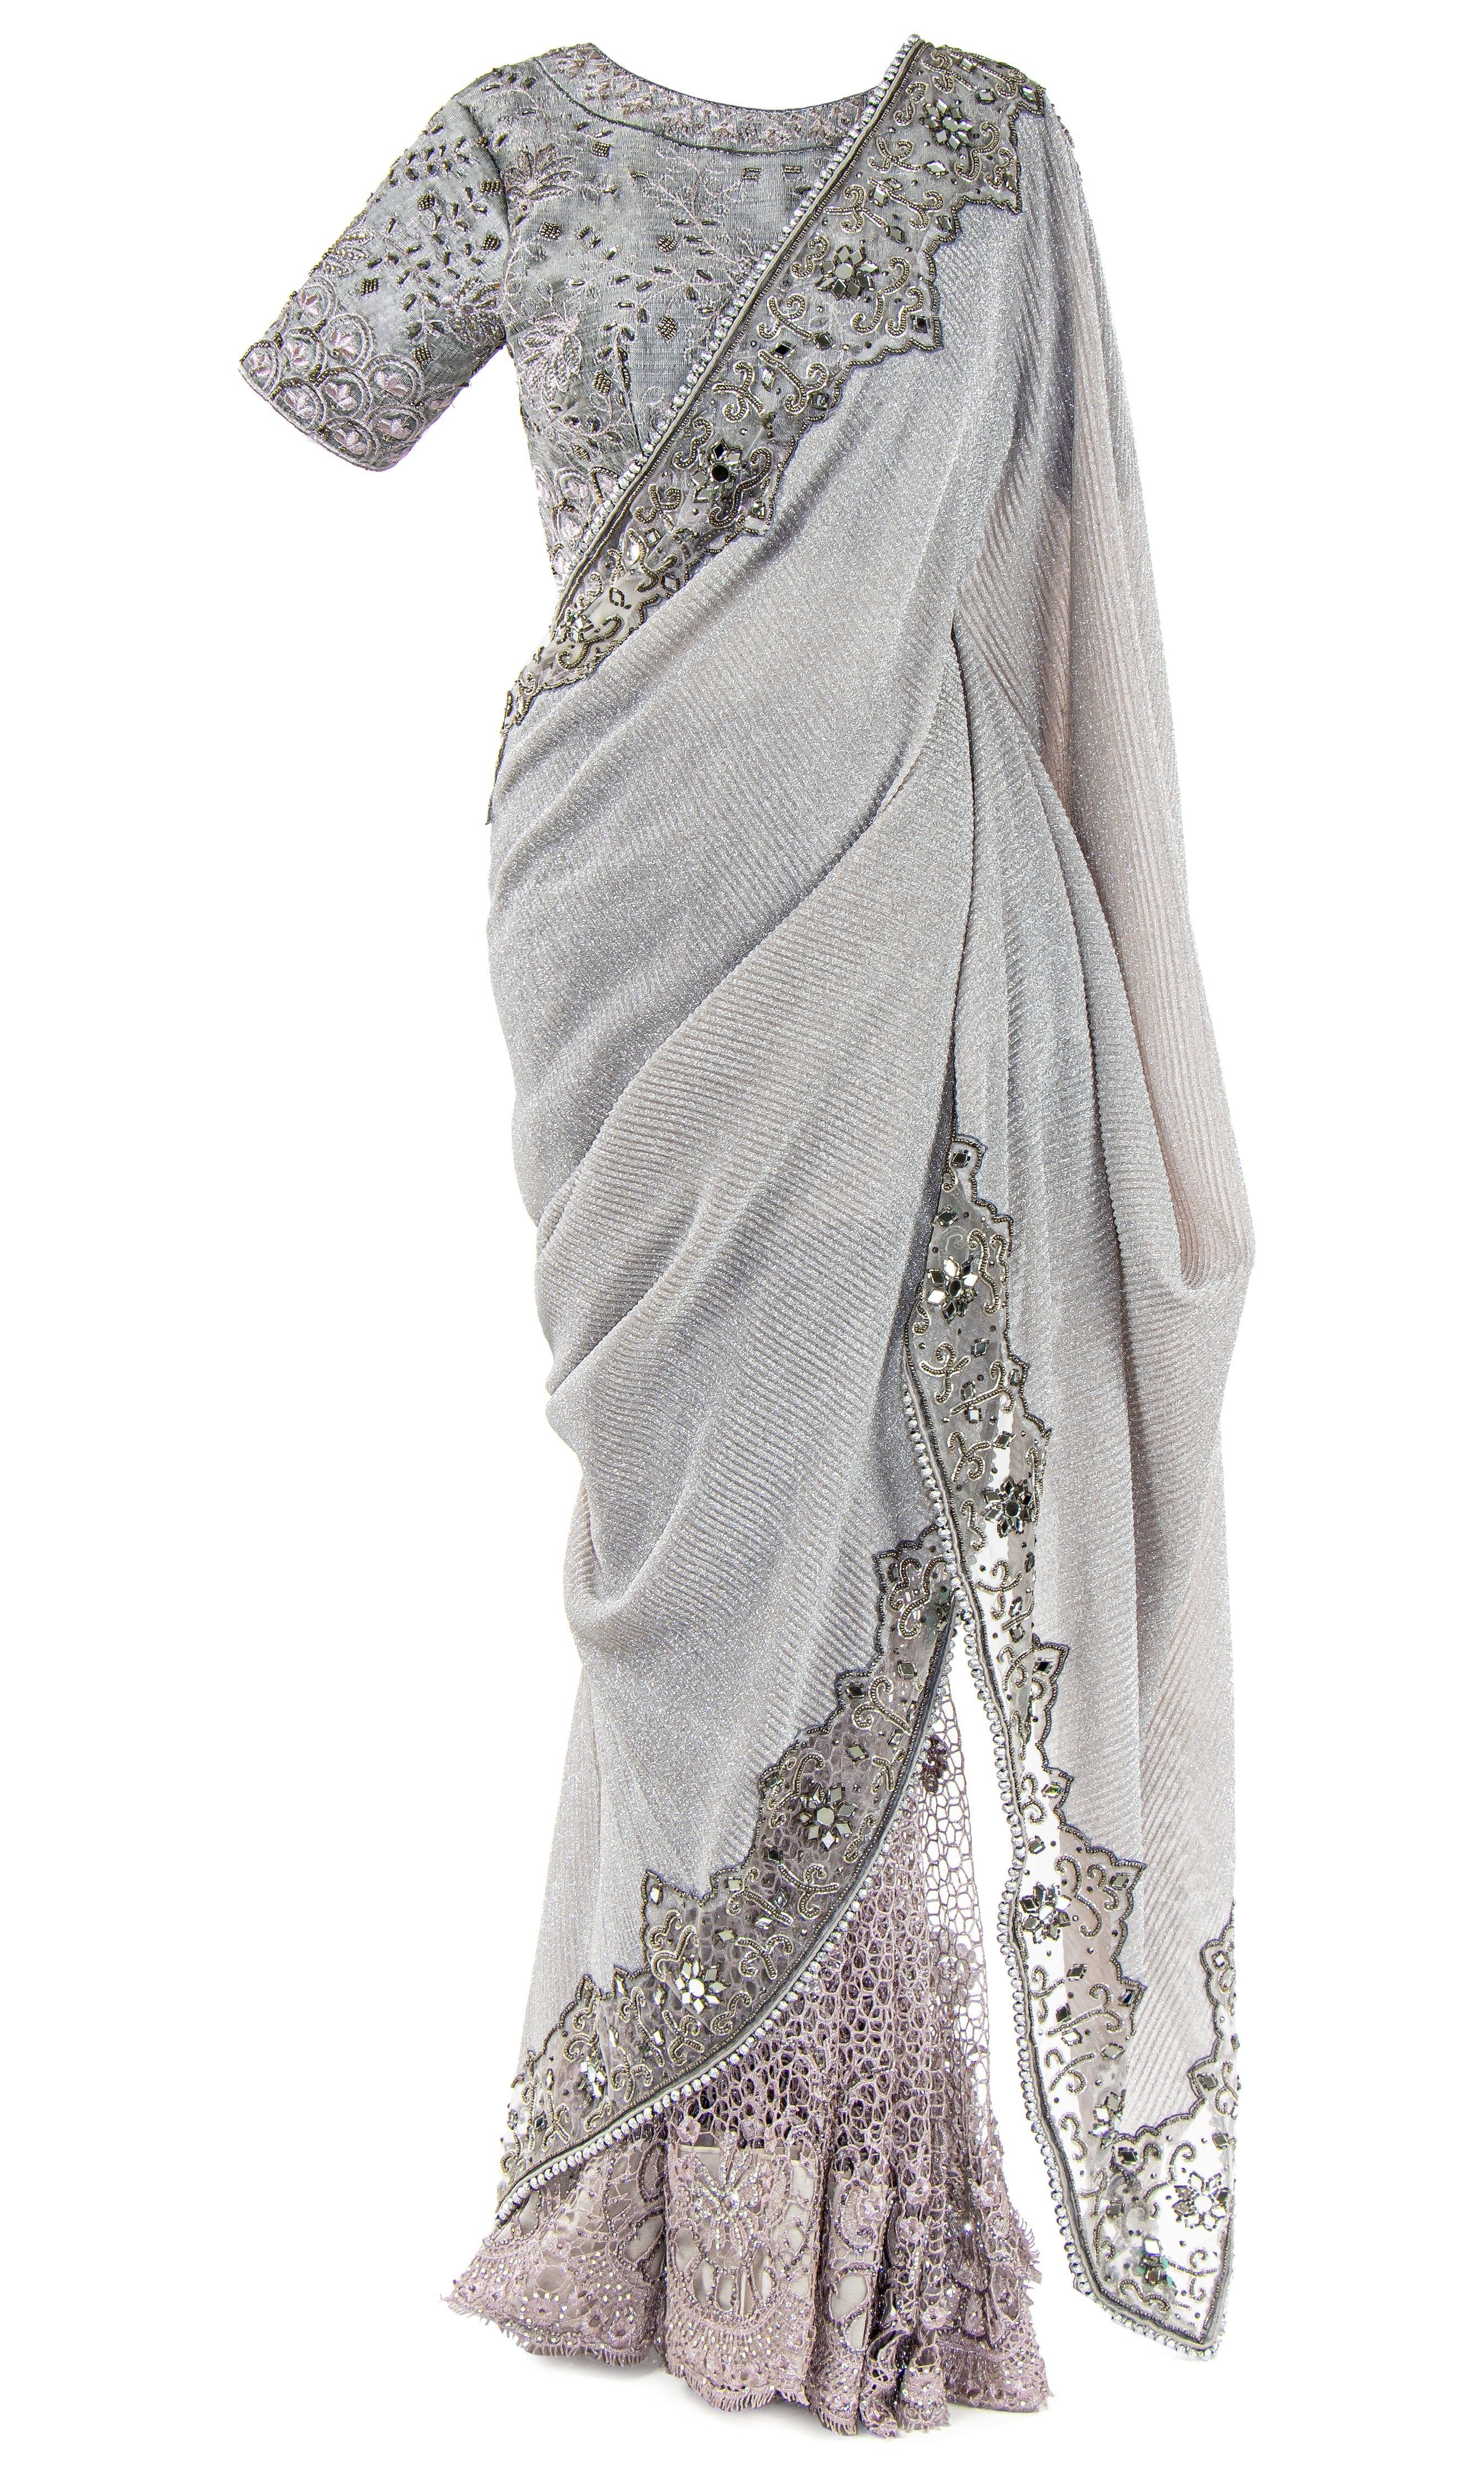 Gray Saree pair with matching blouse elevated with silver beading and mirror work.